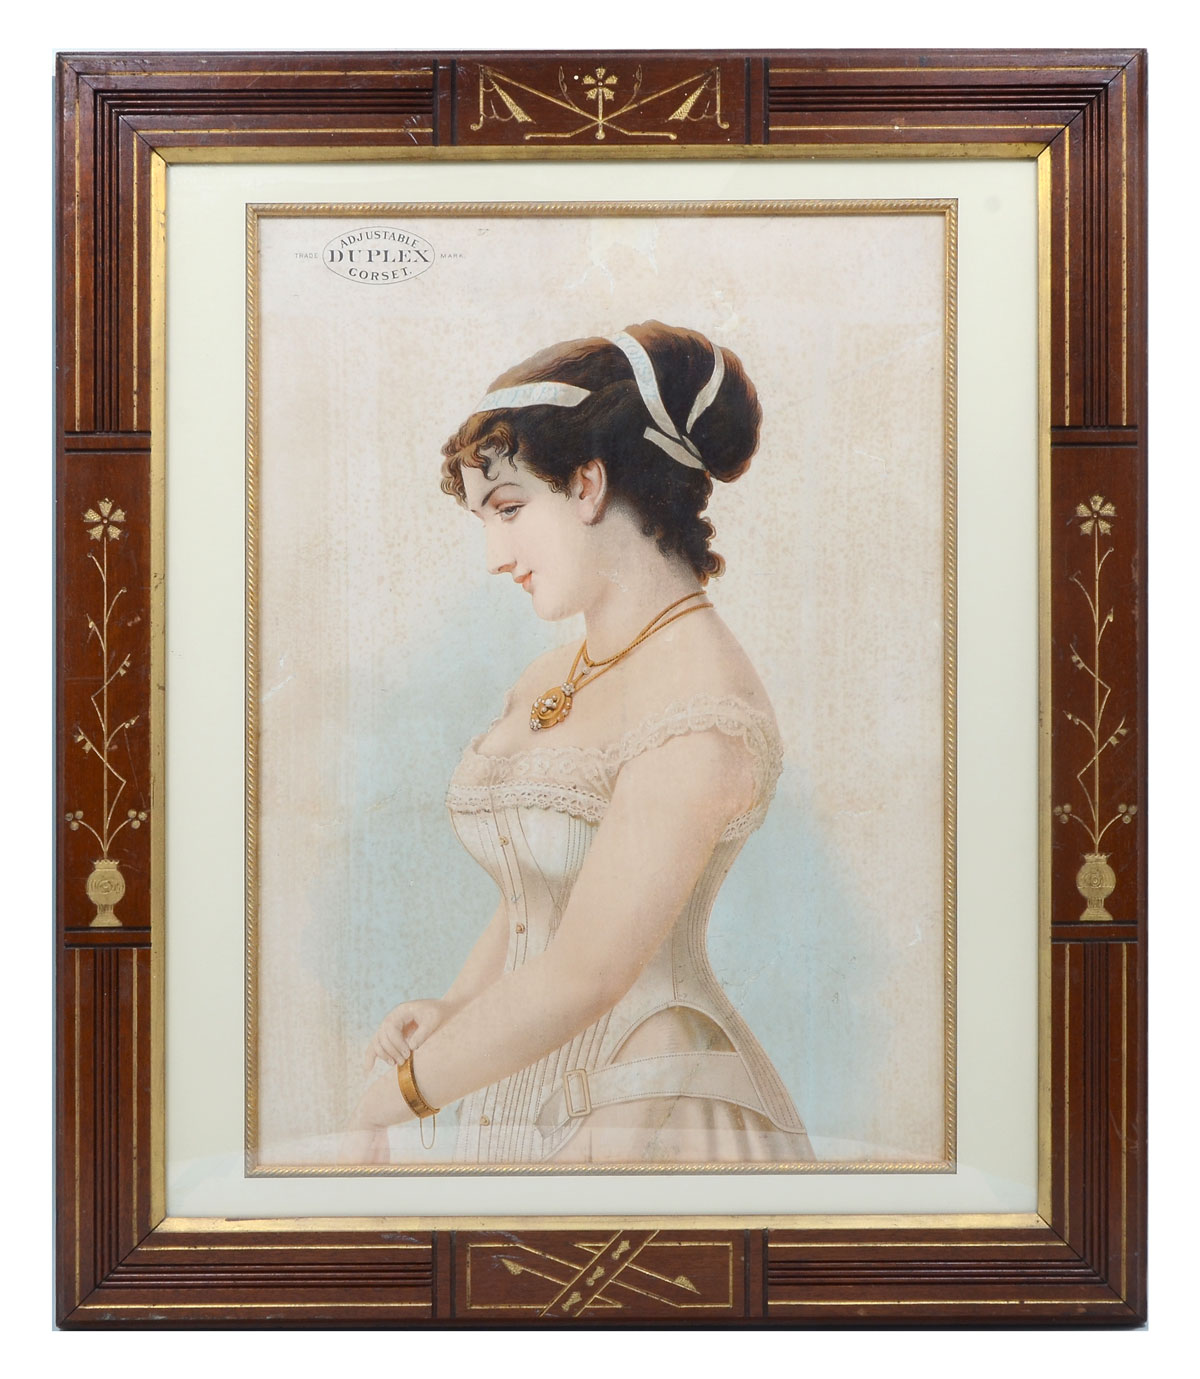 ADVERTISING LITHOGRAPH FOR ADJUSTABLE